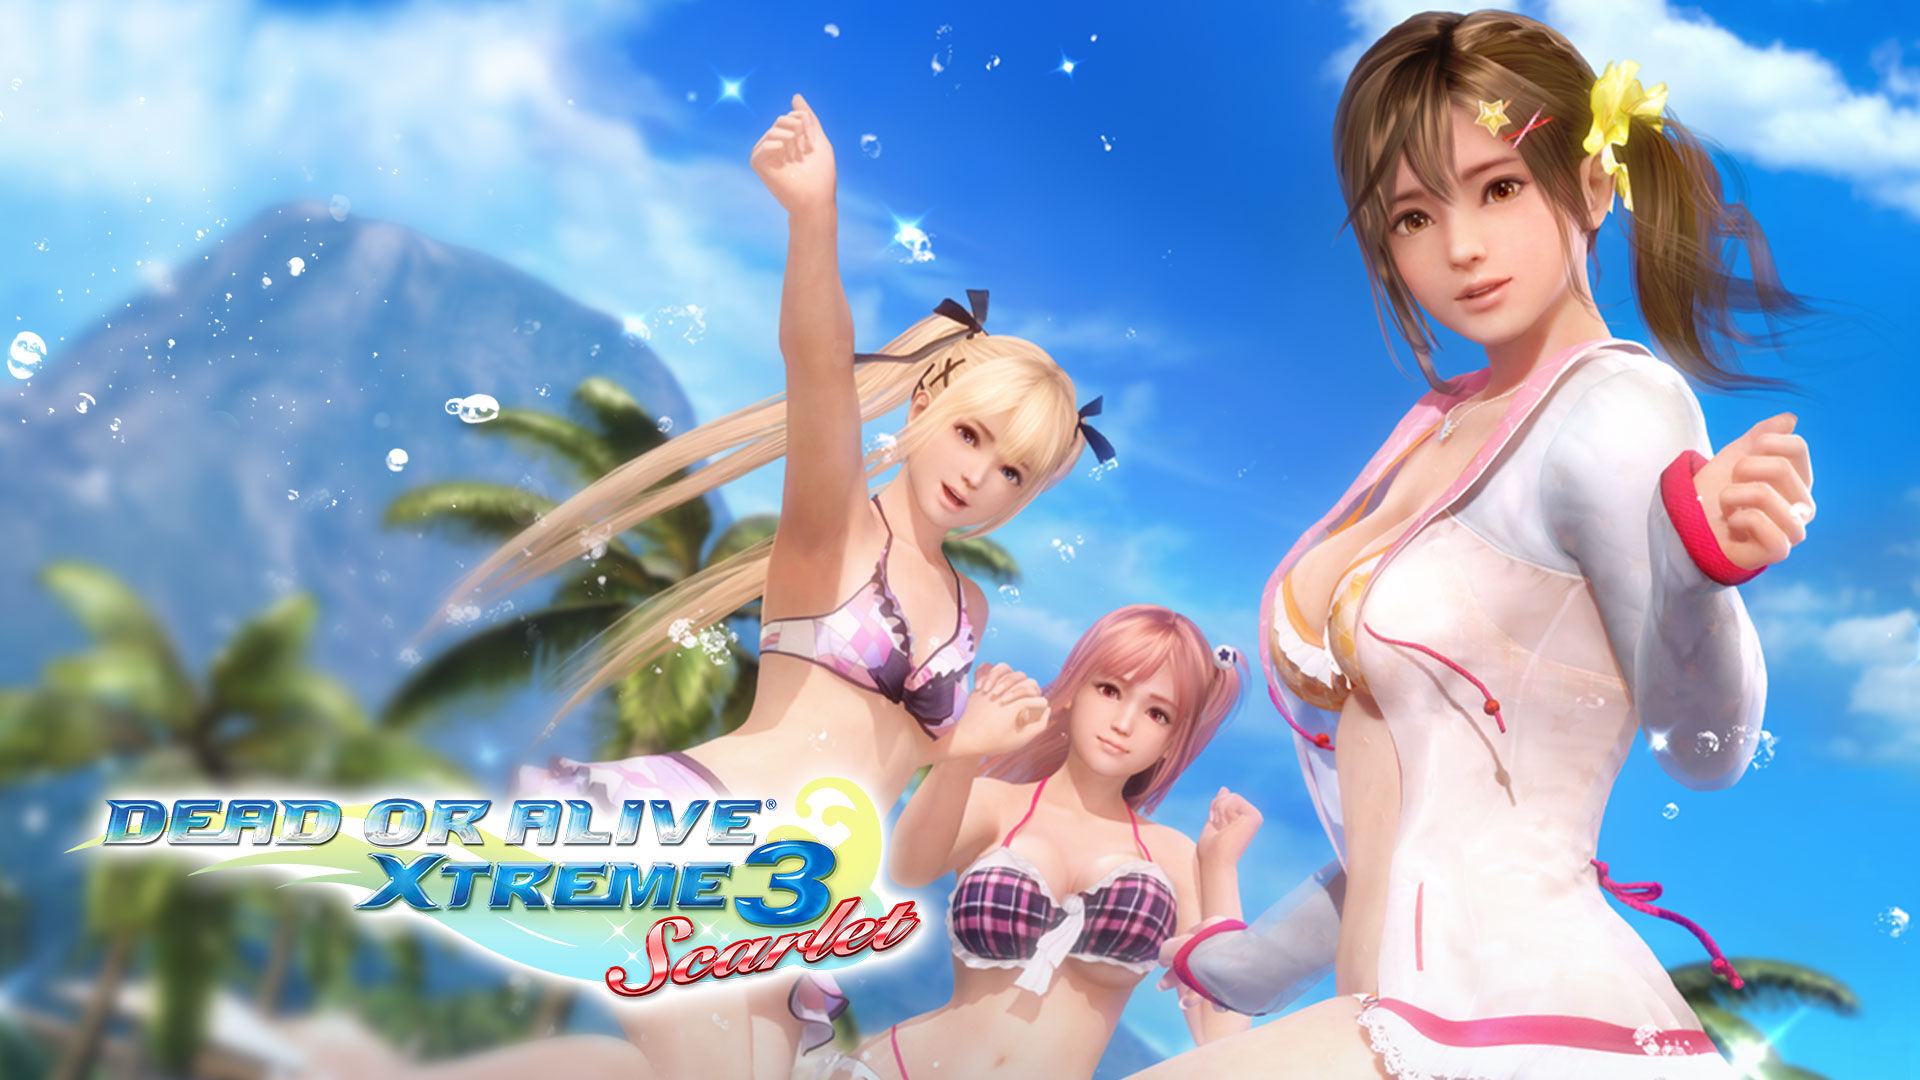 DEAD OR ALIVE Xtreme 3 Scarlet ダウンロード版 | My Nintendo Store ...